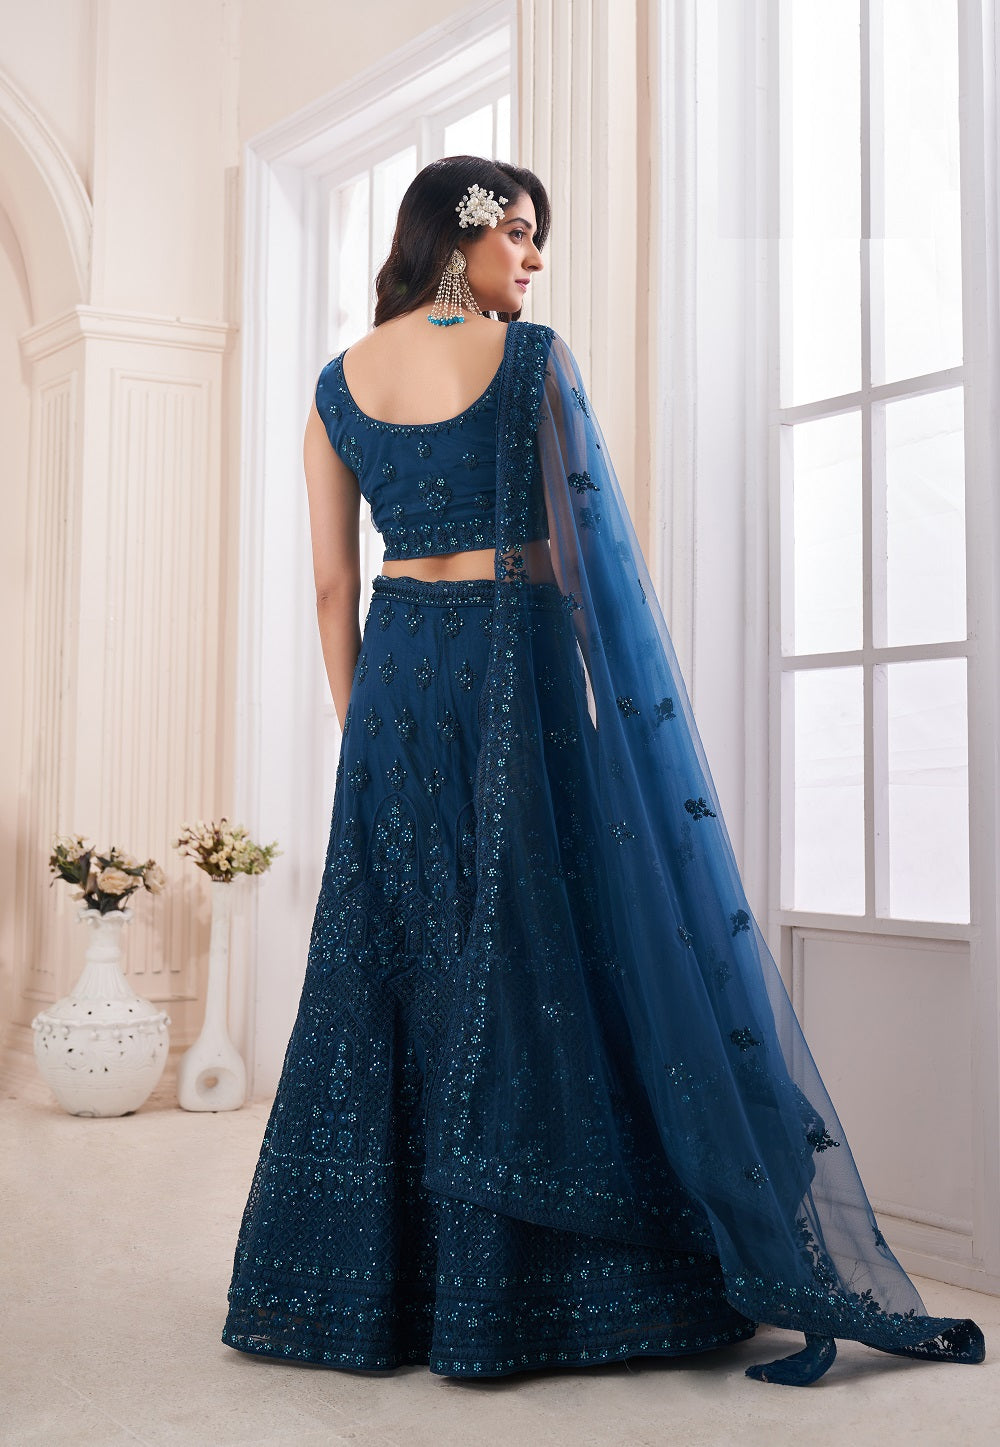 Net Embroidered Lehenga in Teal Blue